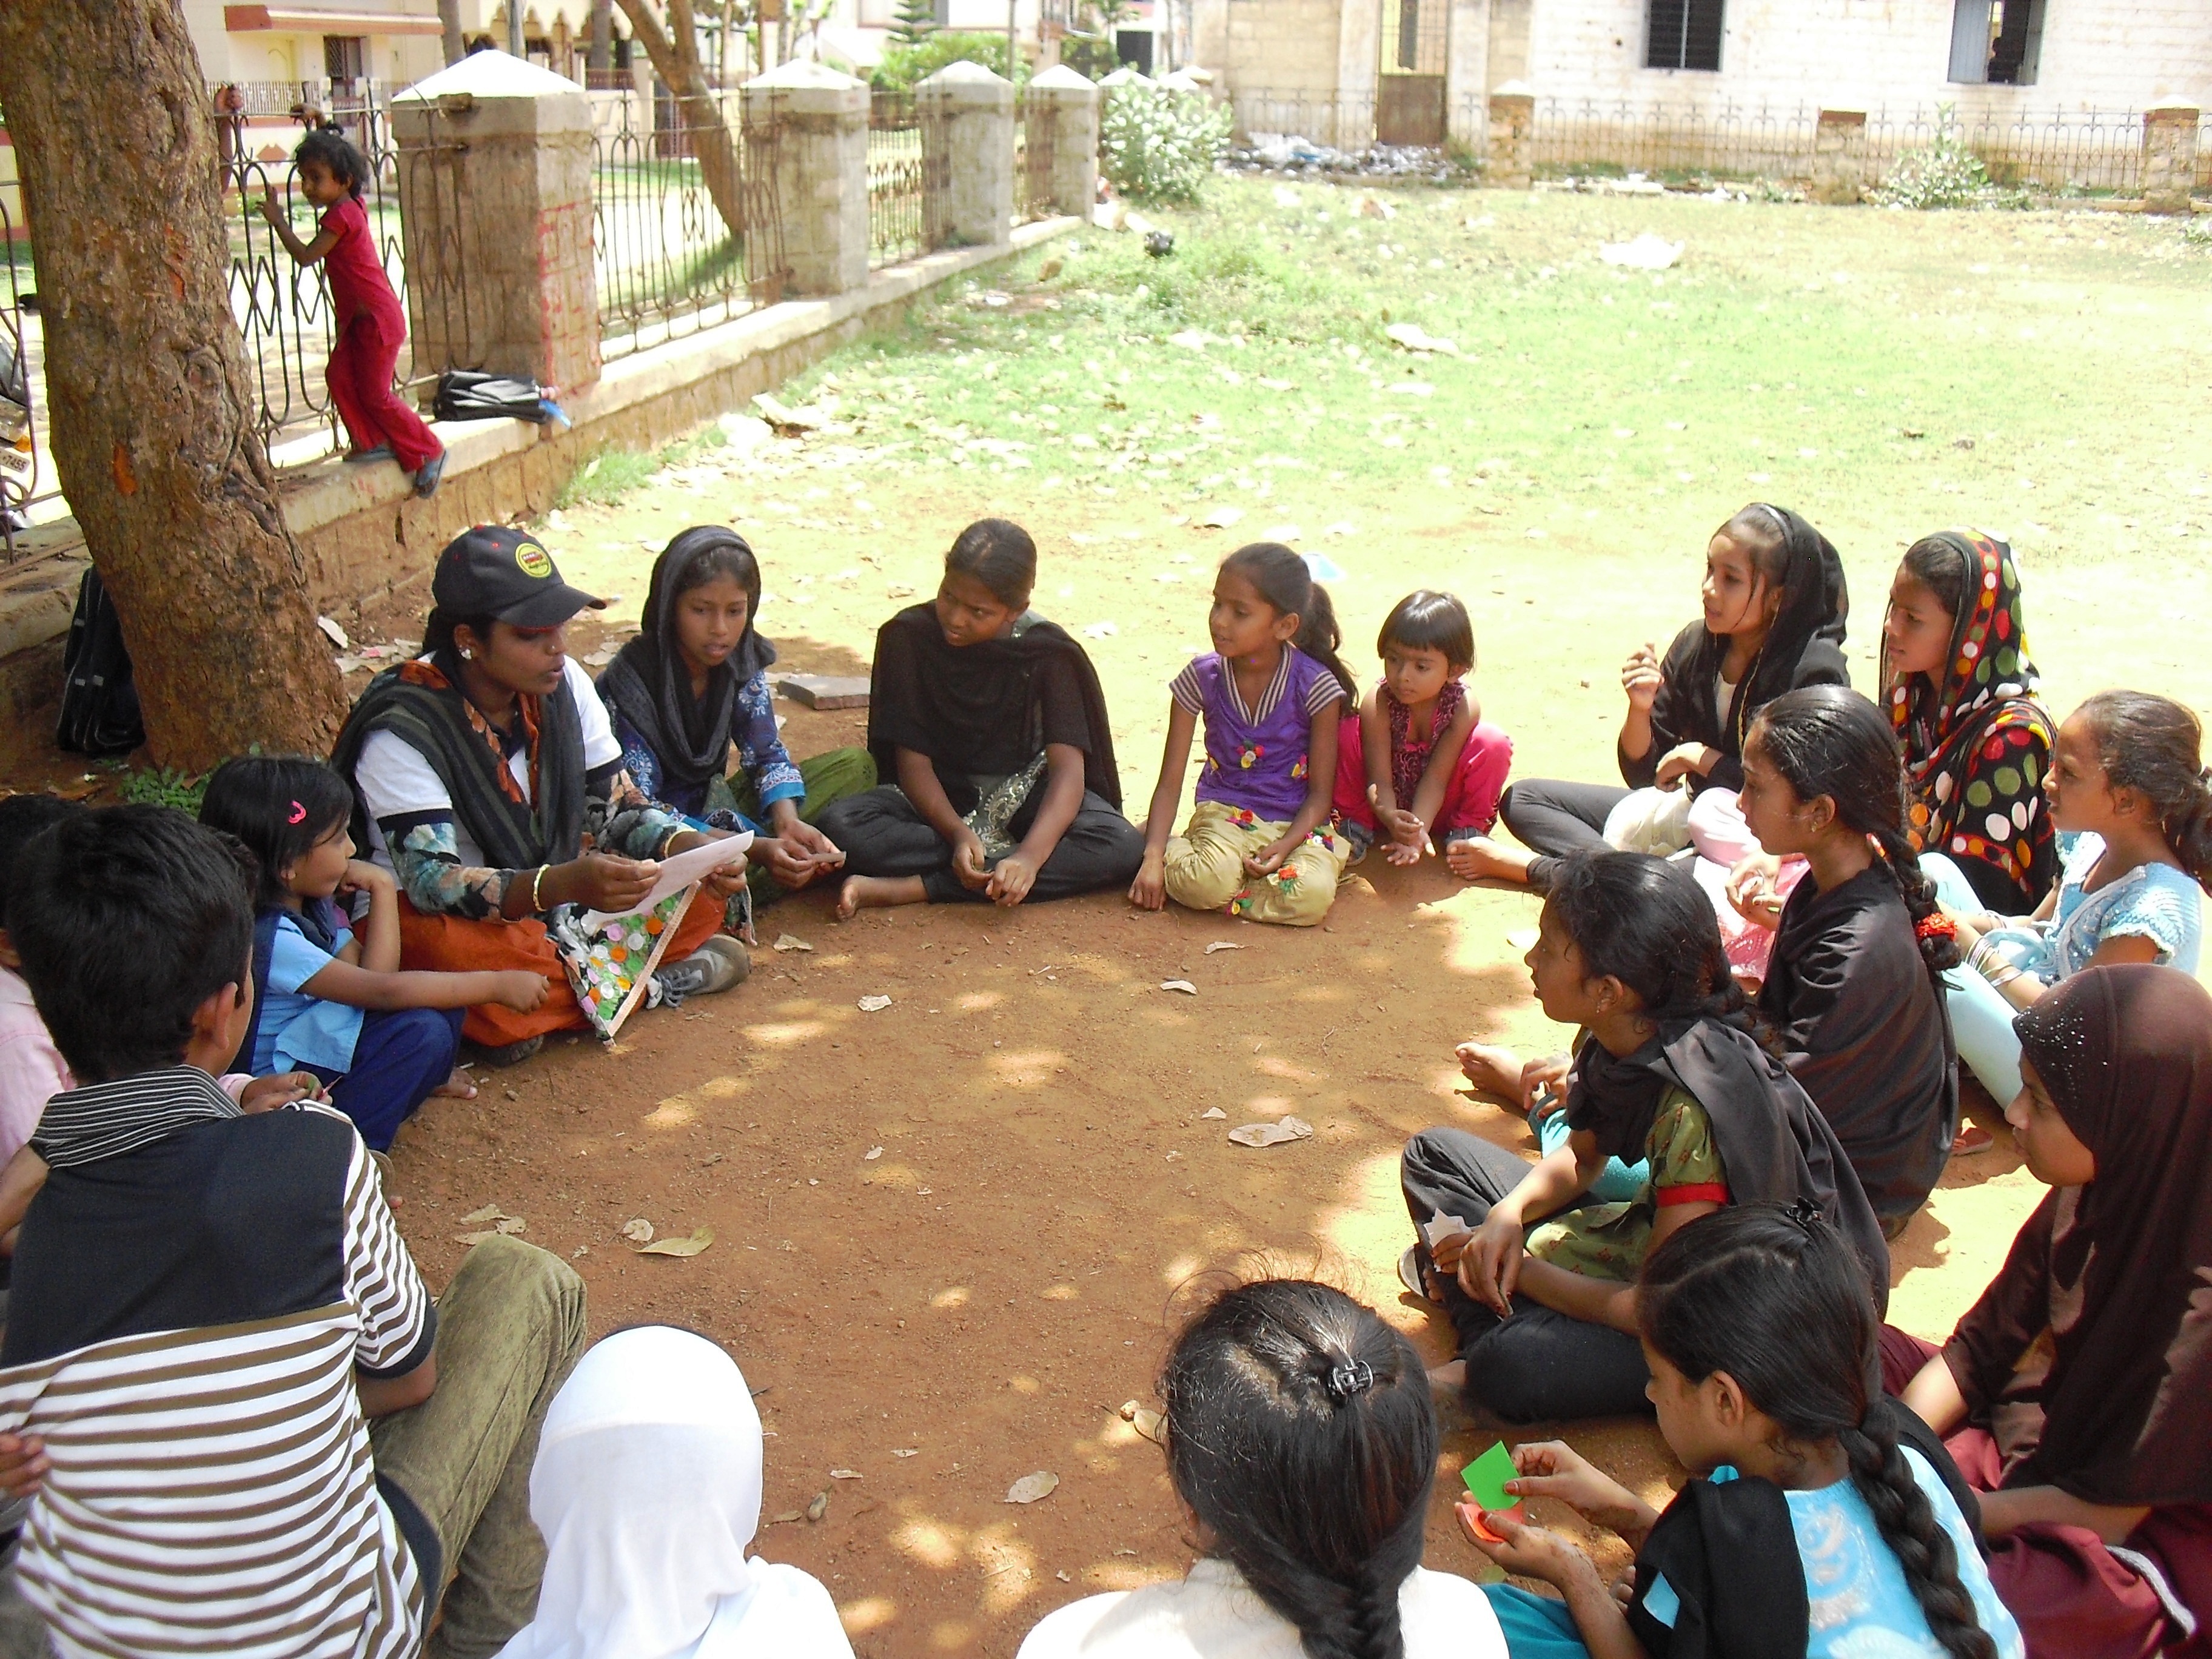 Zaiba Taj, or ‘pilelo-didi’ as she is known among her mentees, makes it a point to introduce interesting educational games and other sporting activities to make schooling enjoyable for children. (Credit: Roshin Varghese\WFS)